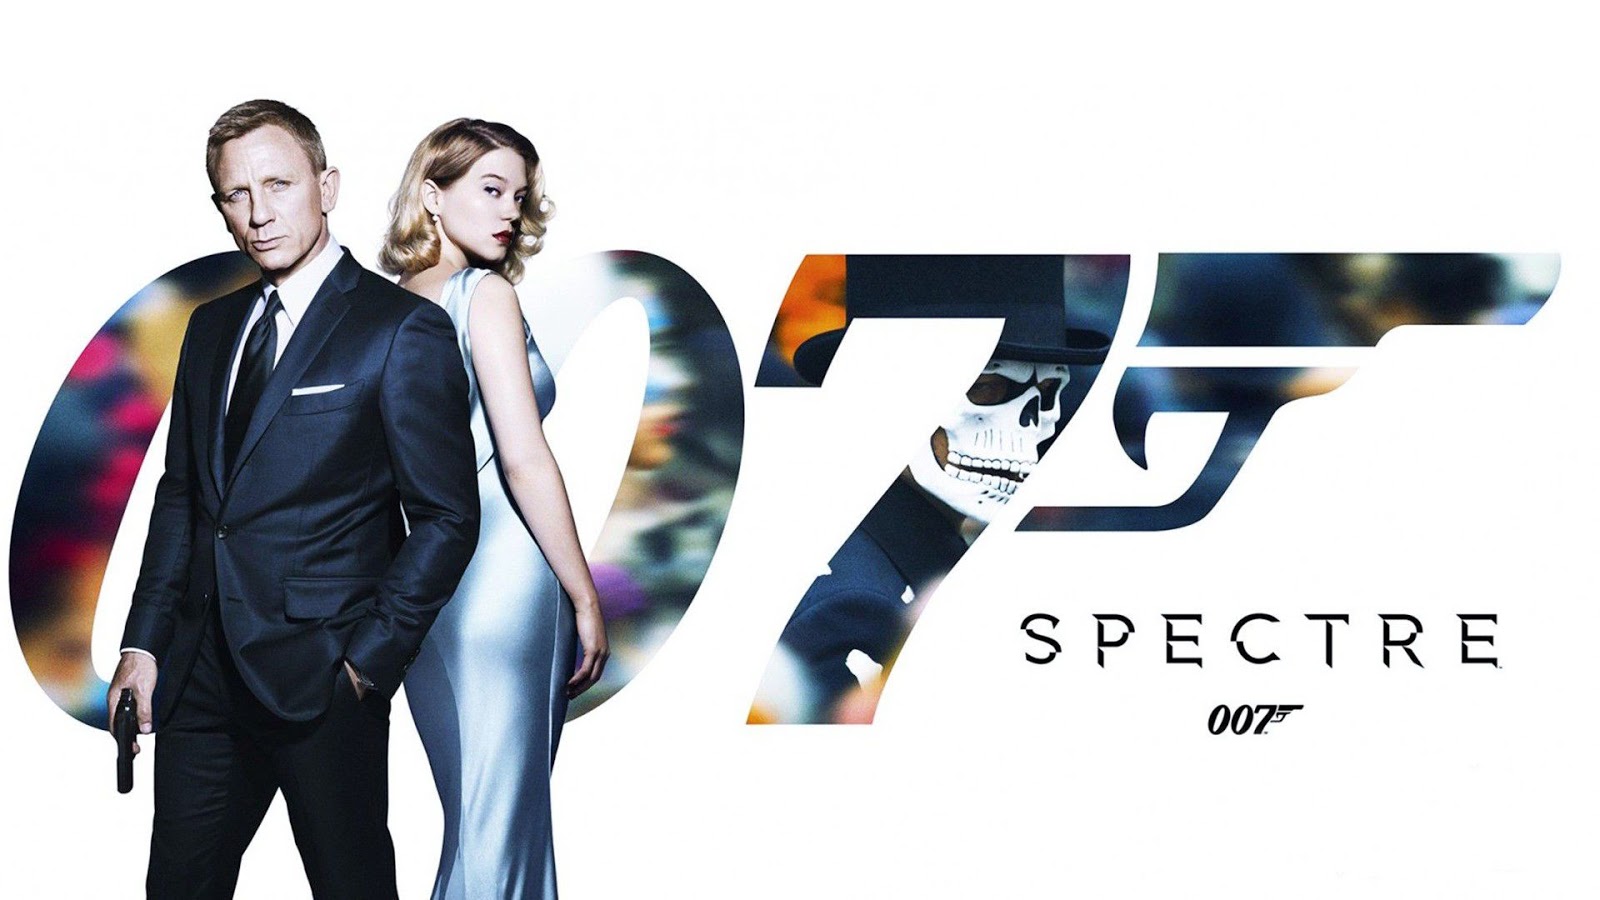 Spectre HD Wallpaper Awesome